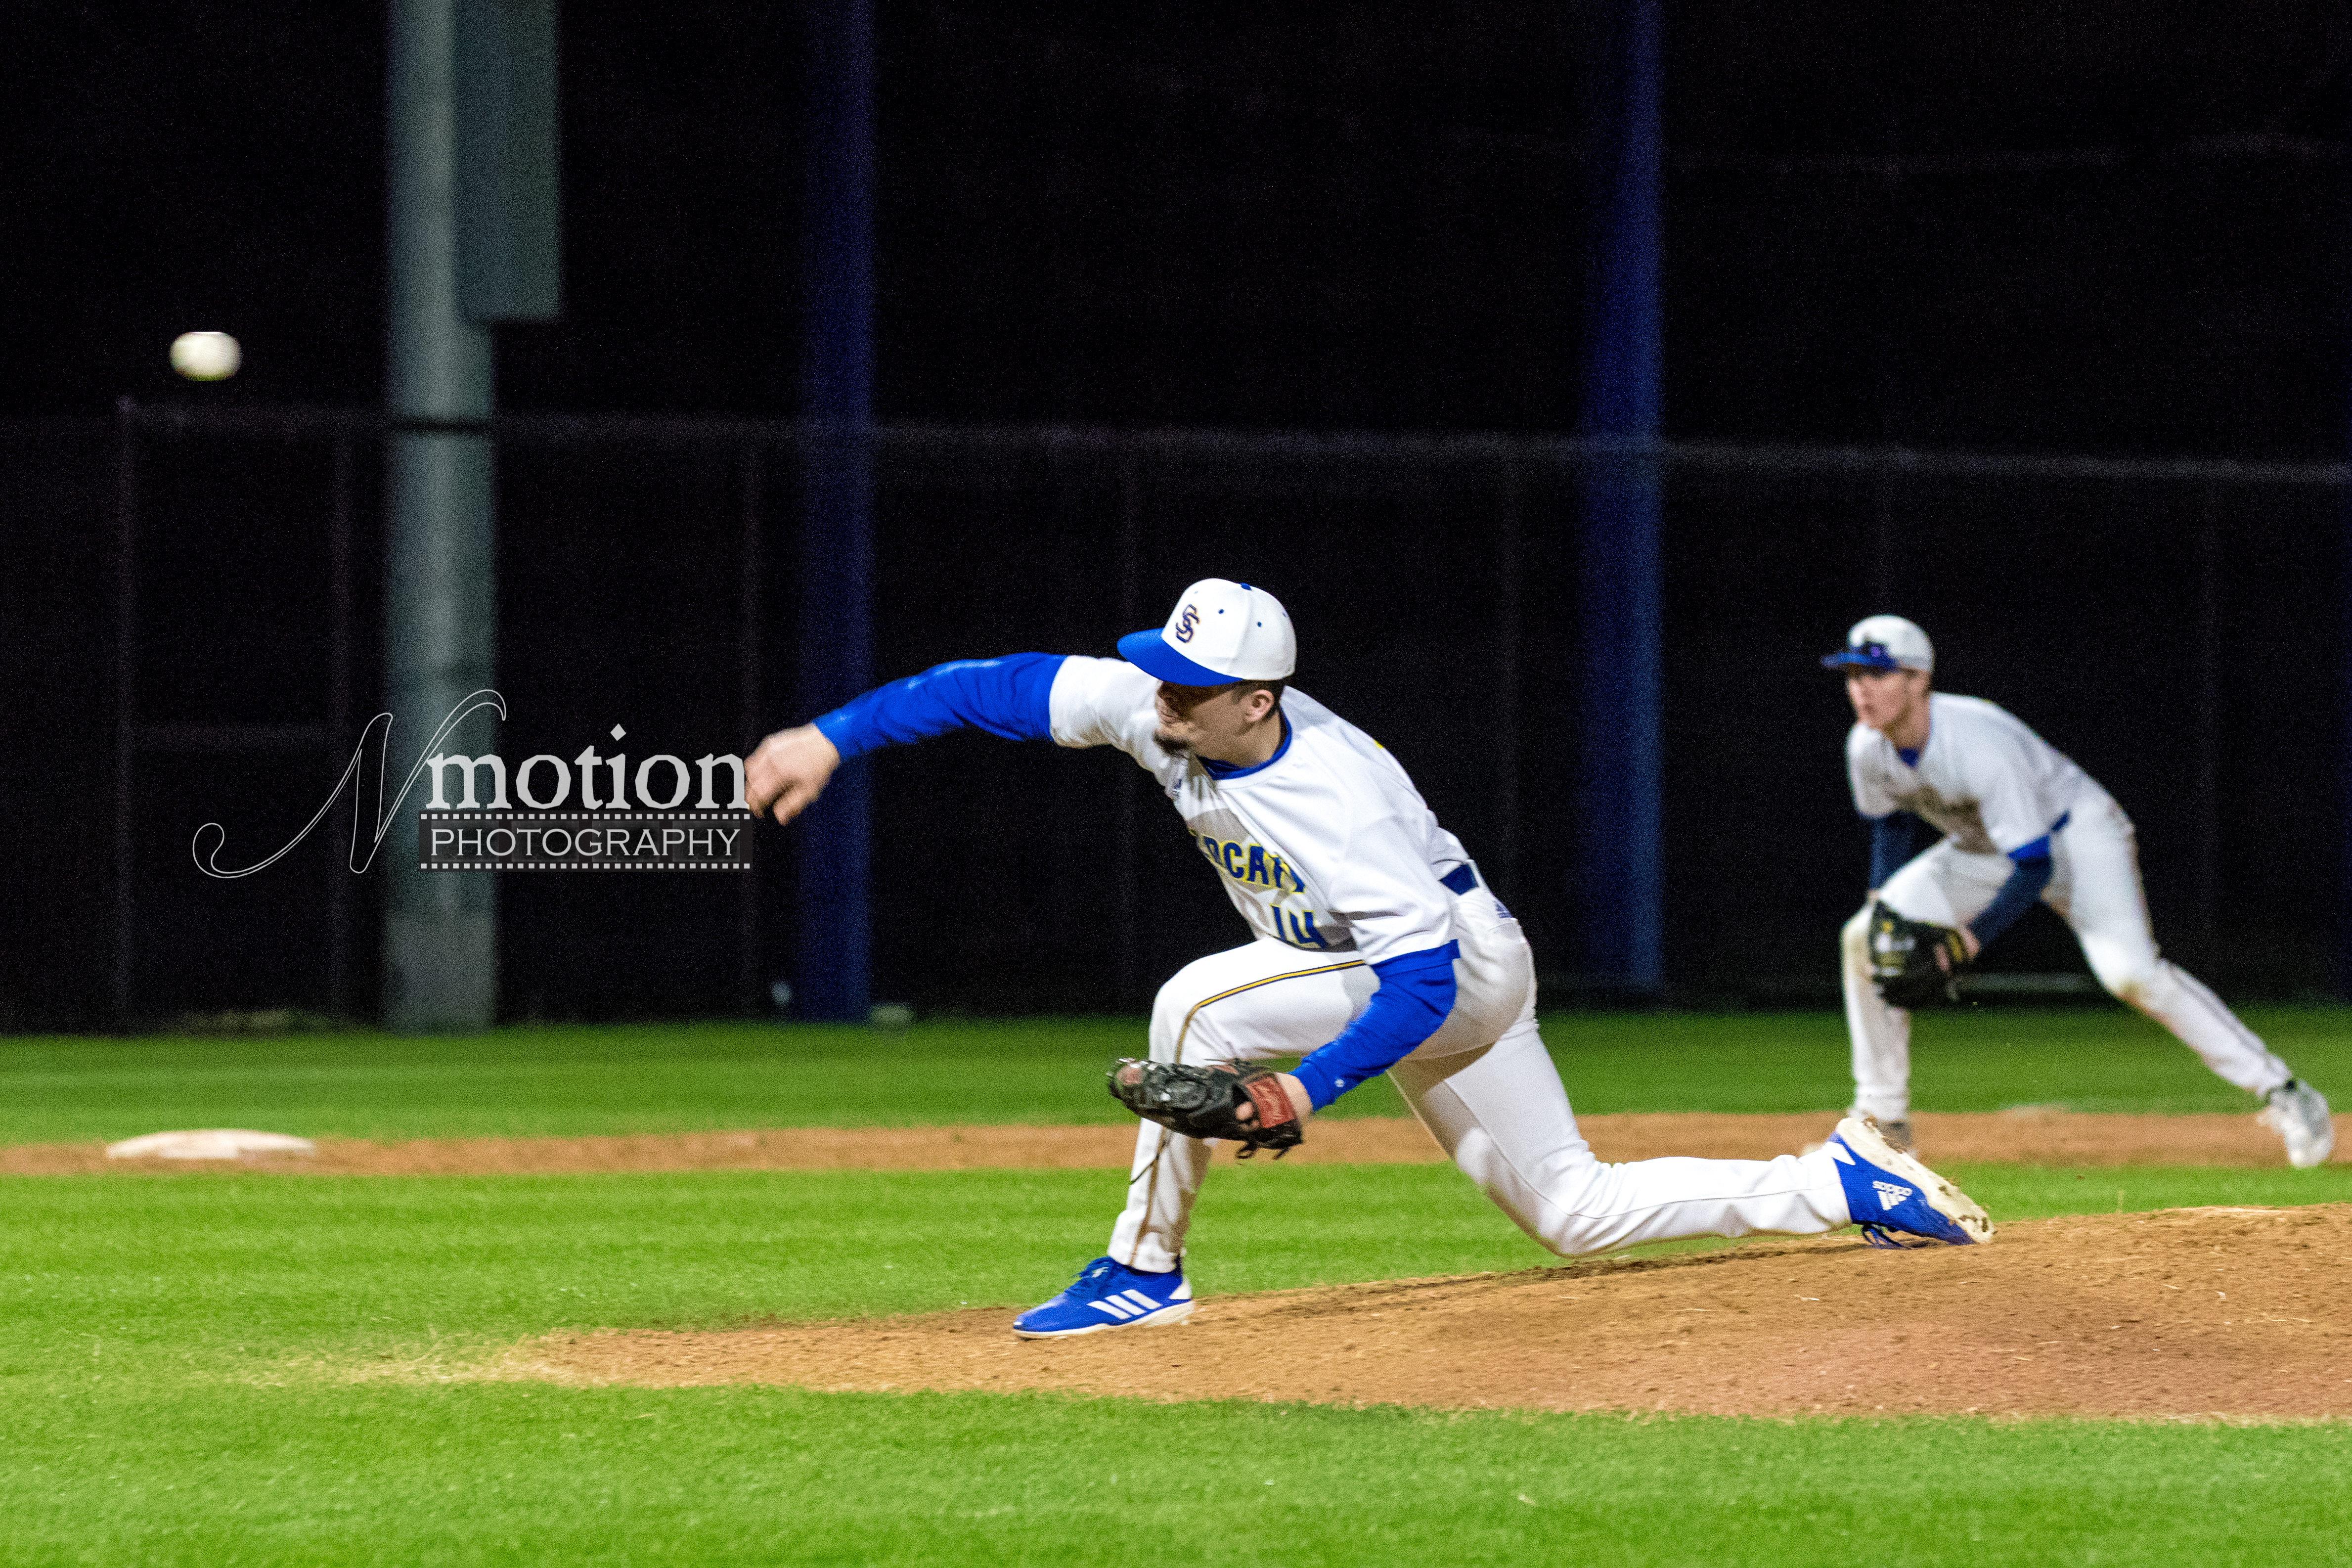 Photos from SSHS Baseball’s 10-4 Win in Home Opener vs North Lamar by Cathy Bryan of Nmotion Photography!